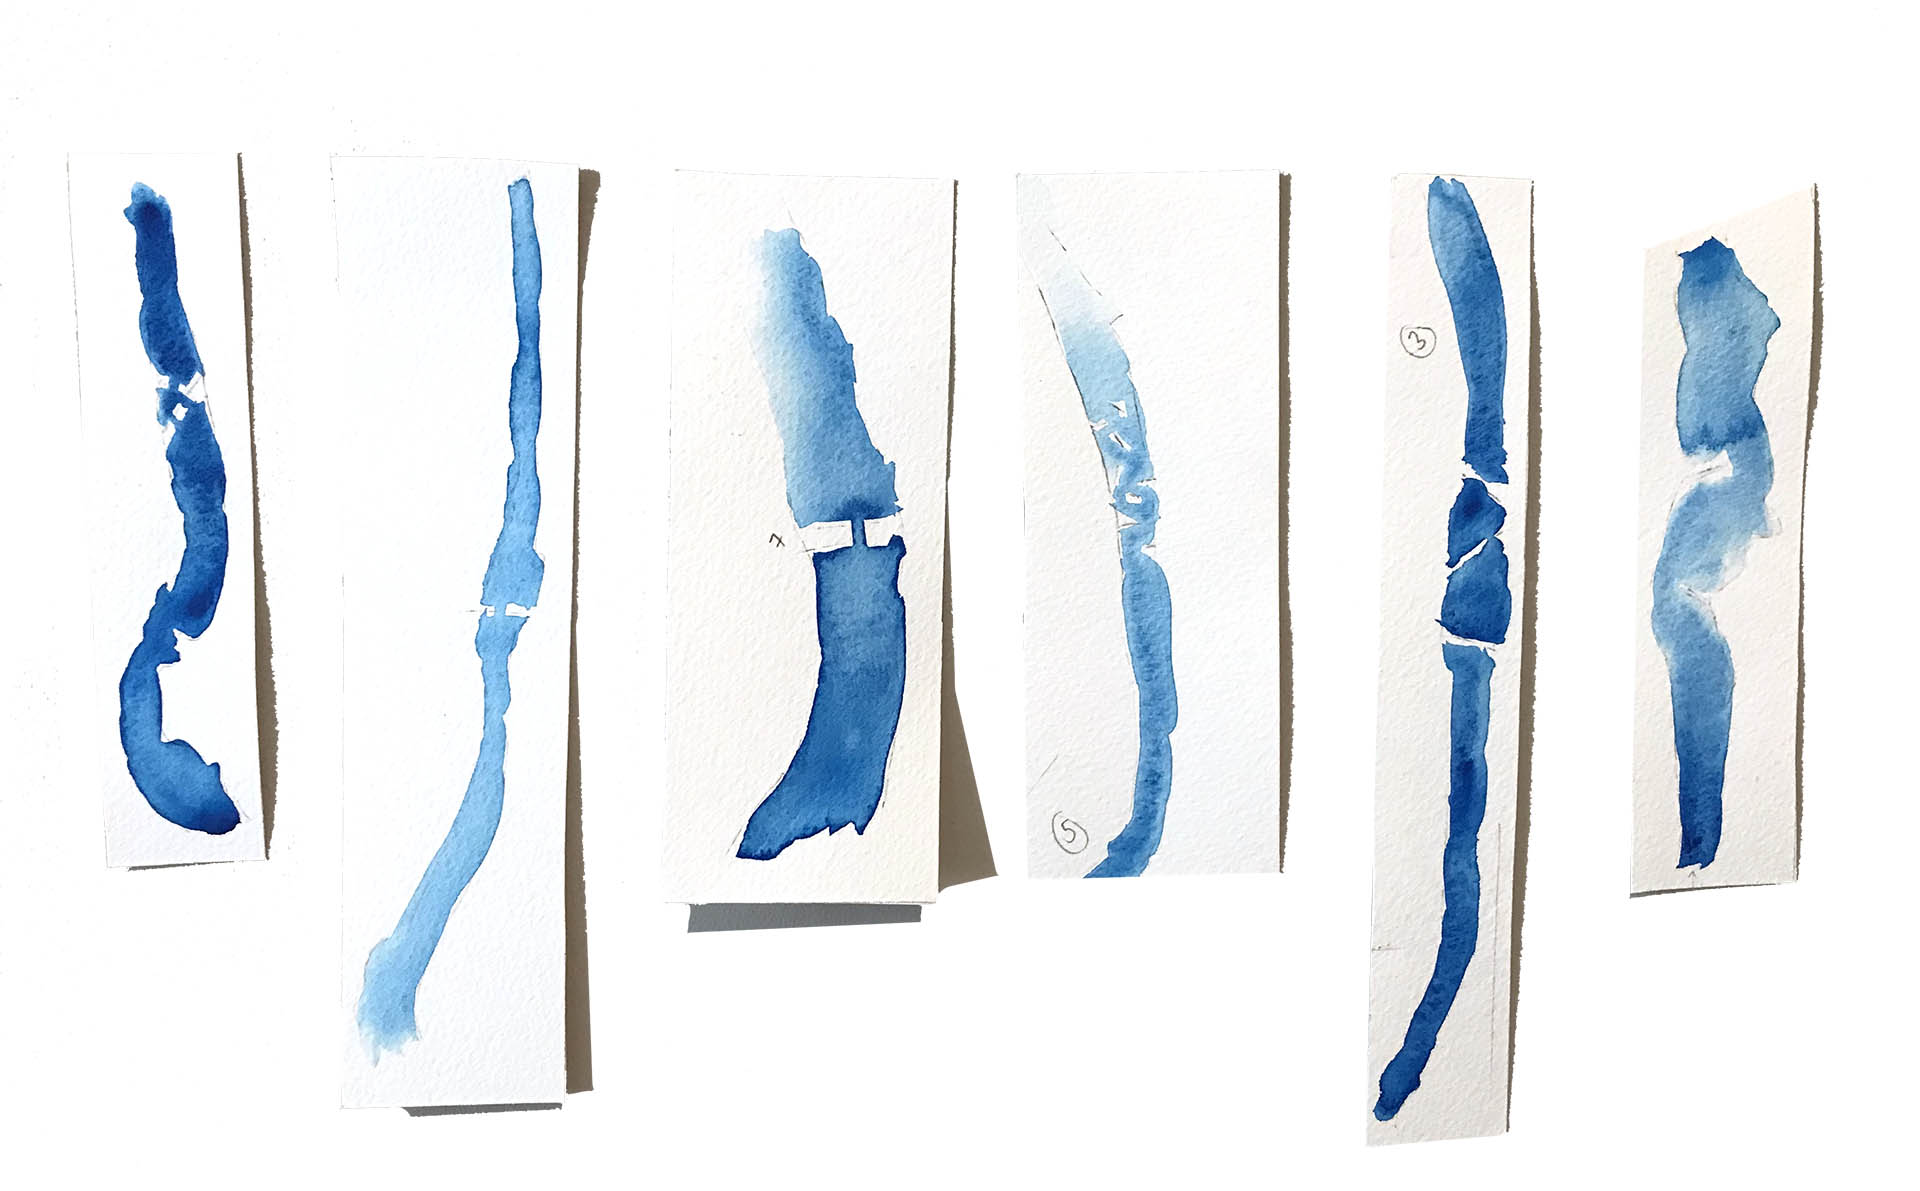 Series of 6 watercolour paint experiments of the flow of water through the proposed river interventions  